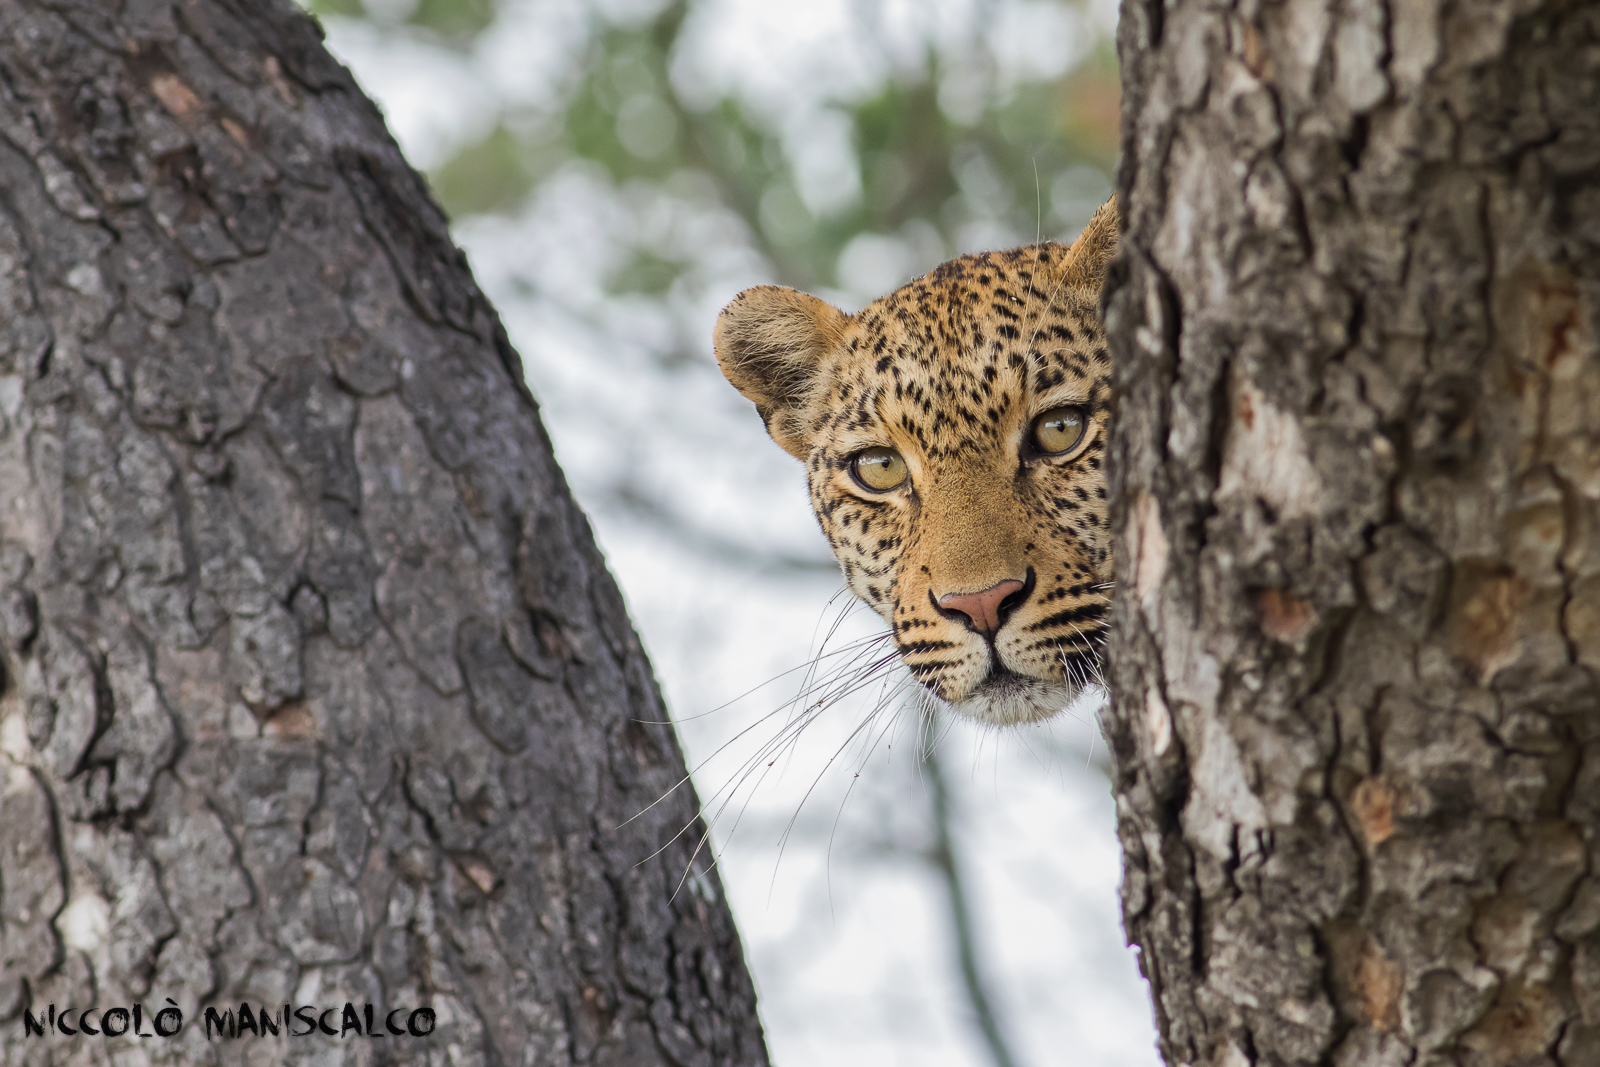 The Curious leopard (South Africa #21)...